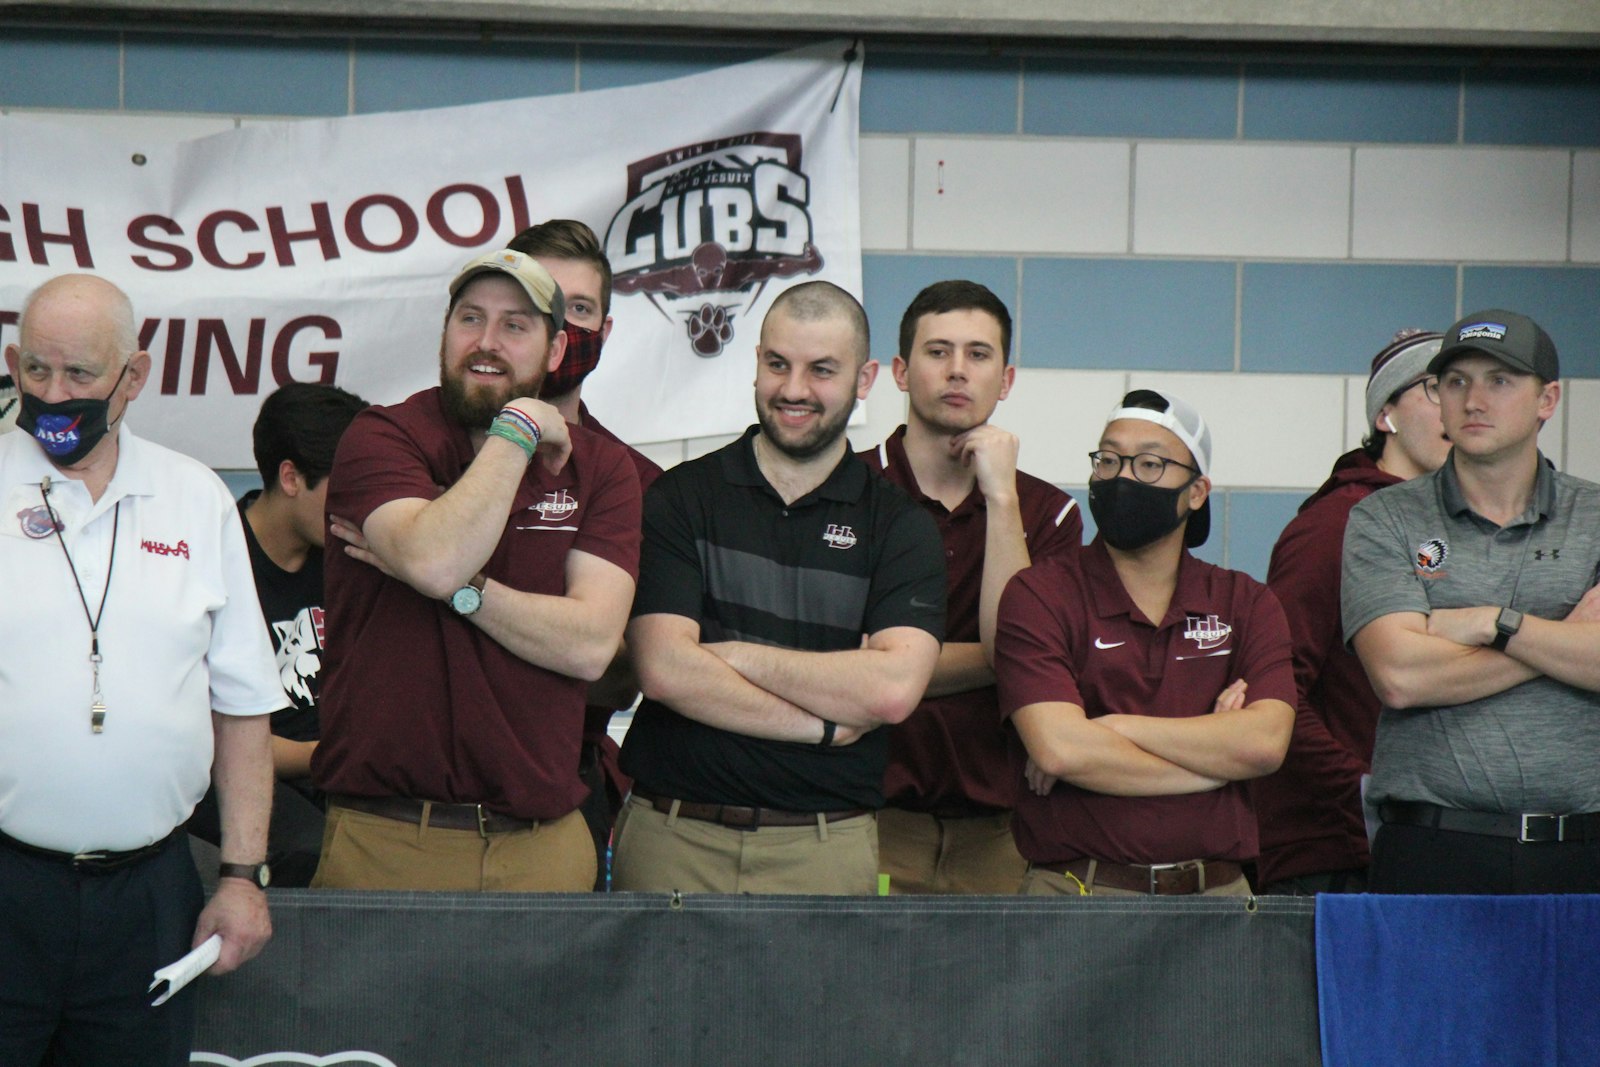 University of Detroit Jesuit coaches look on during the 500 freestyle race. Cub senior Scooby Szuba finished 11th in the event.